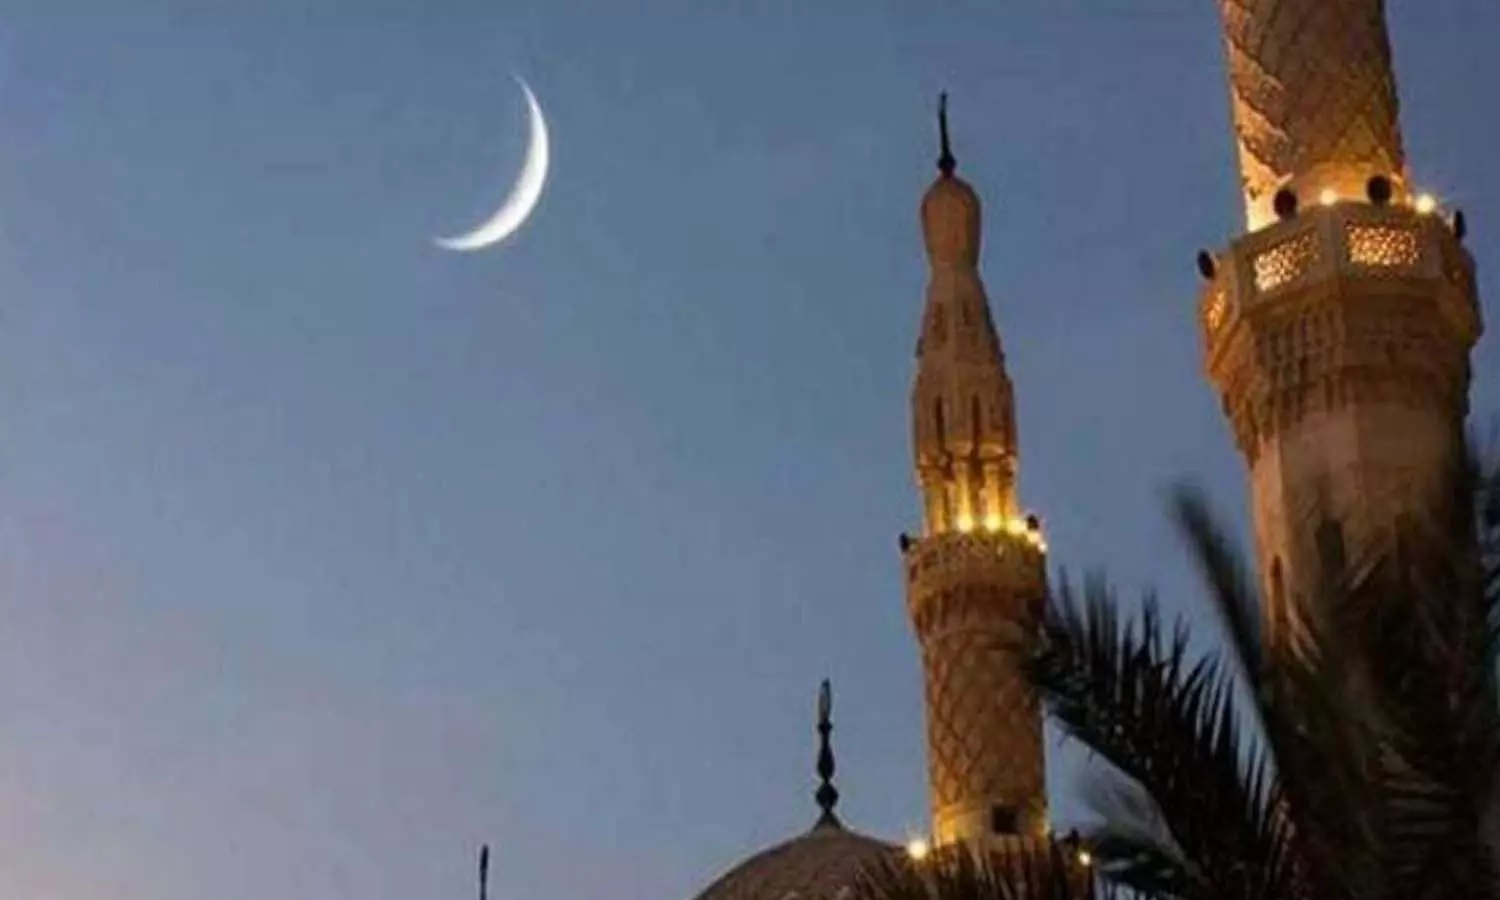 Moon not visible on Monday, now the month of Muharram will start from Wednesday